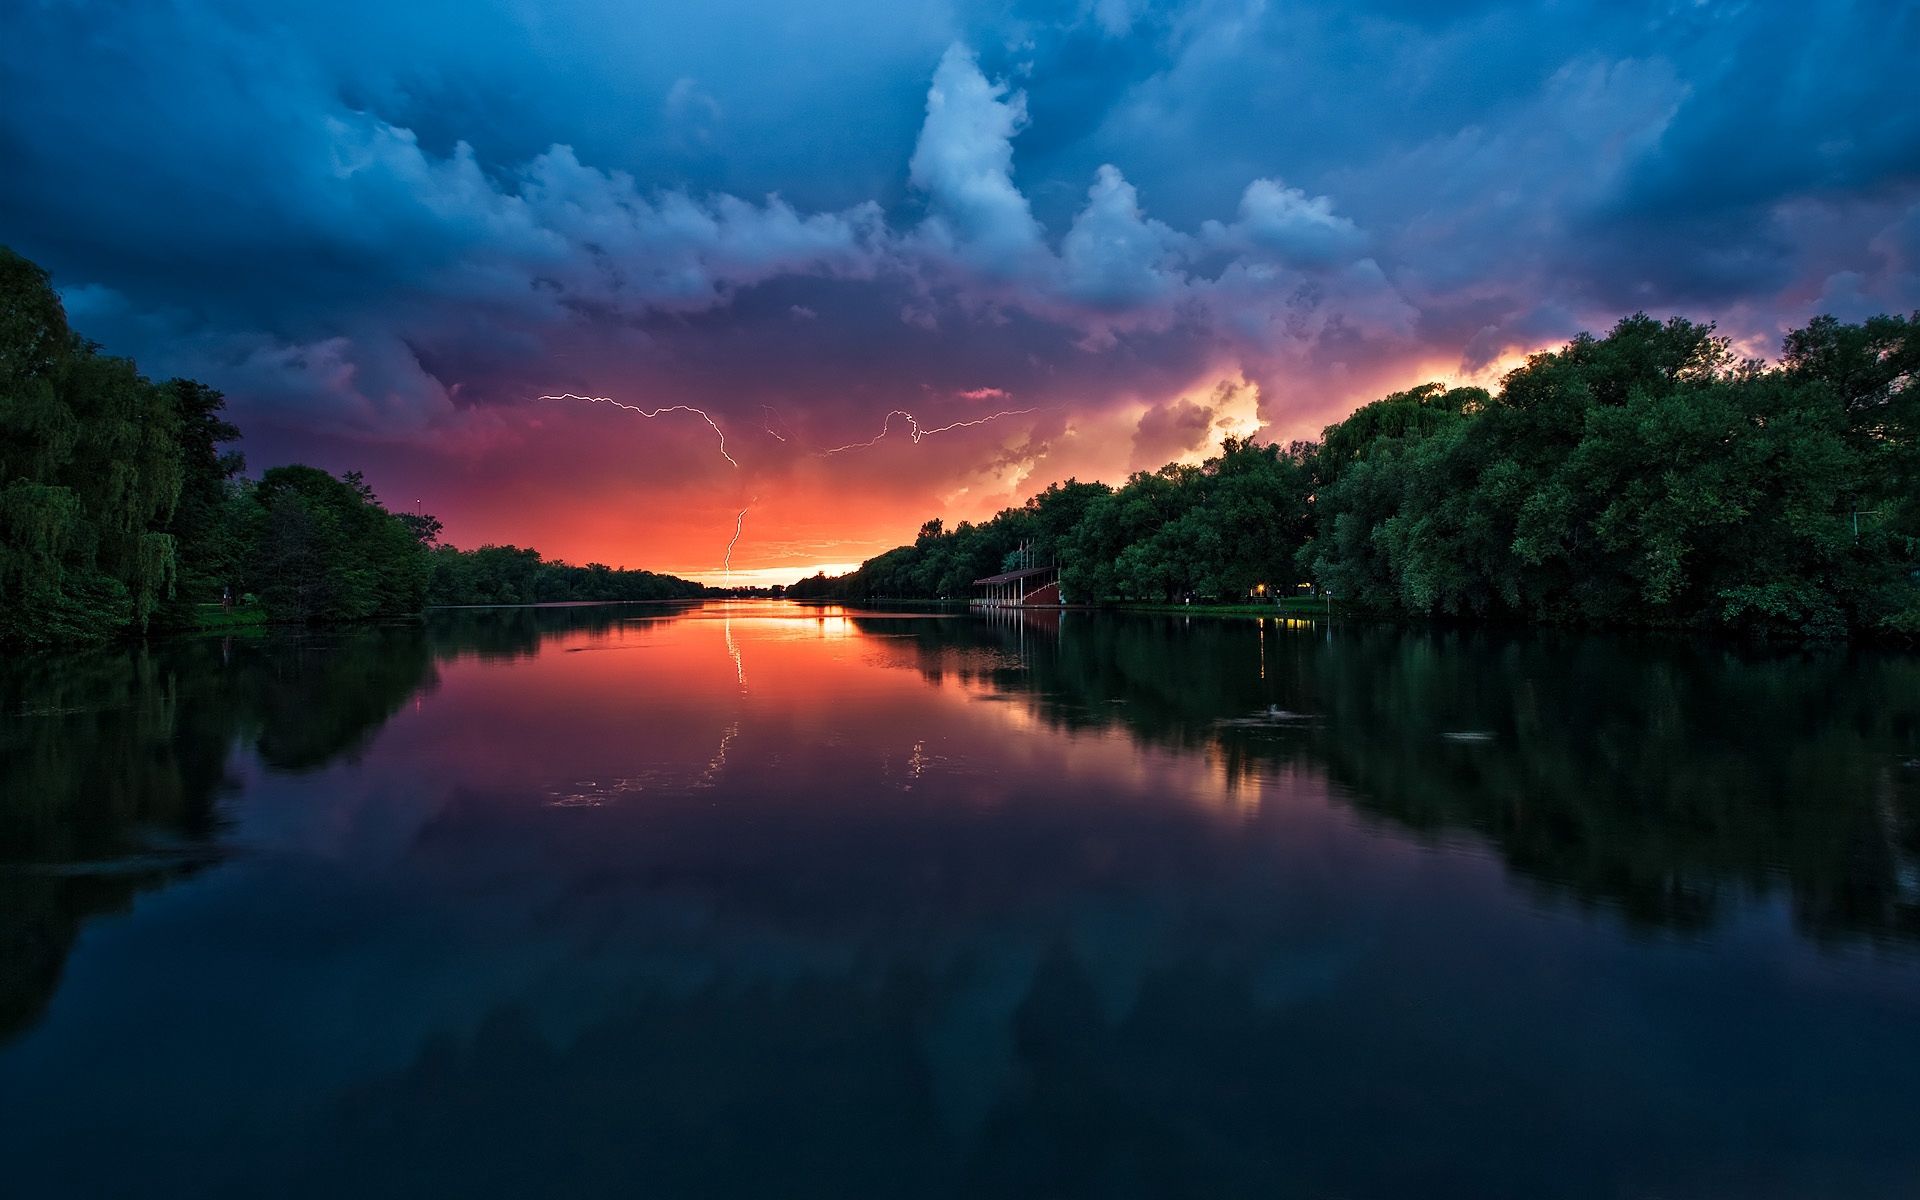 Download Wallpaper 1920x1200 Clouds, Thunder Storm, River